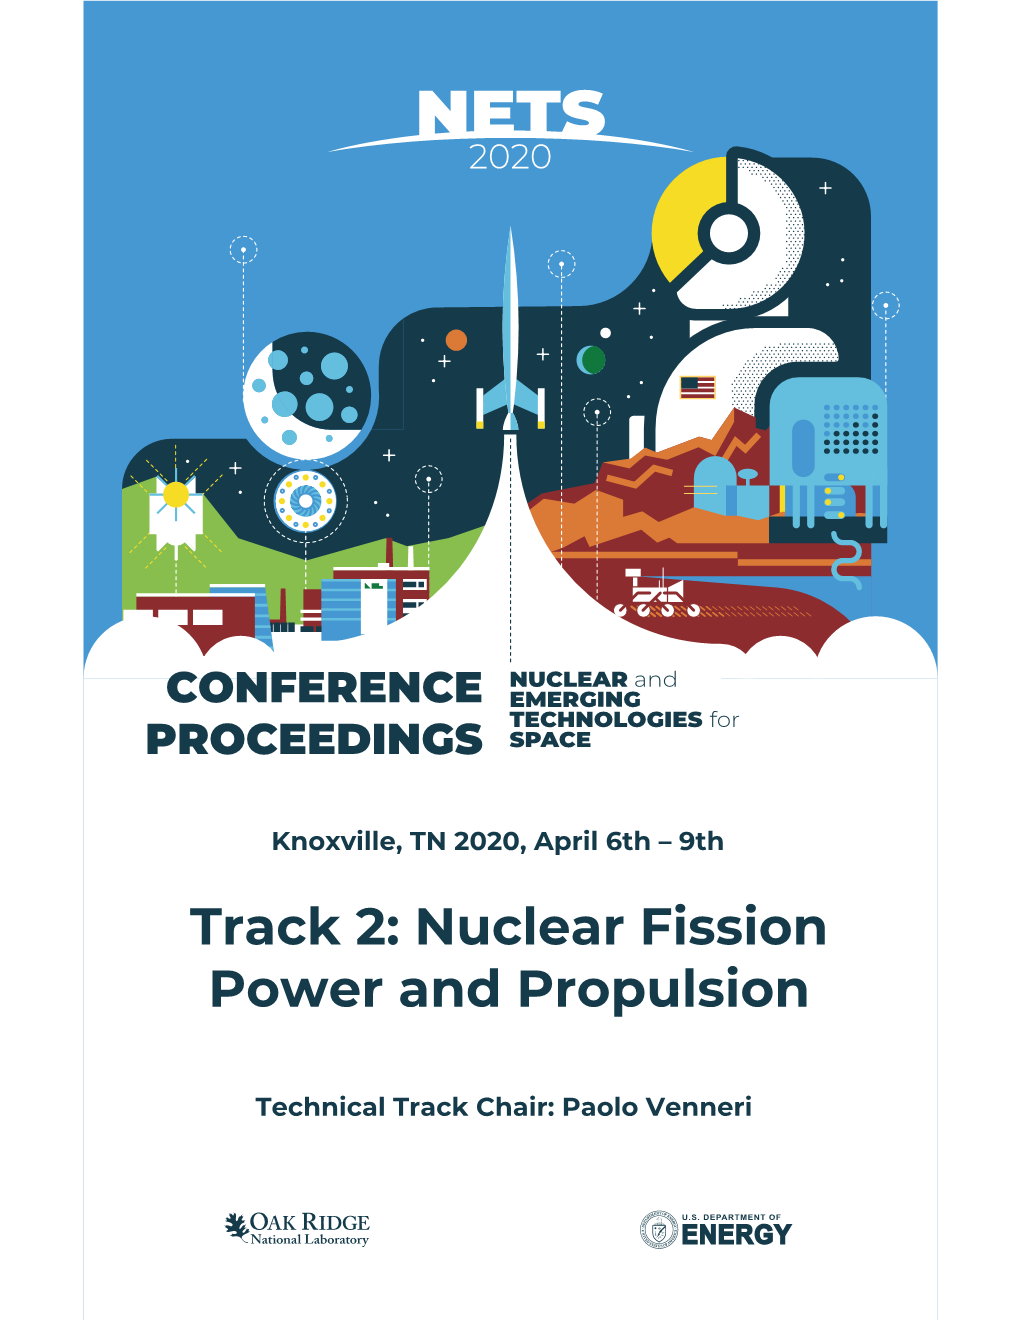 Nuclear Fission Power and Propulsion